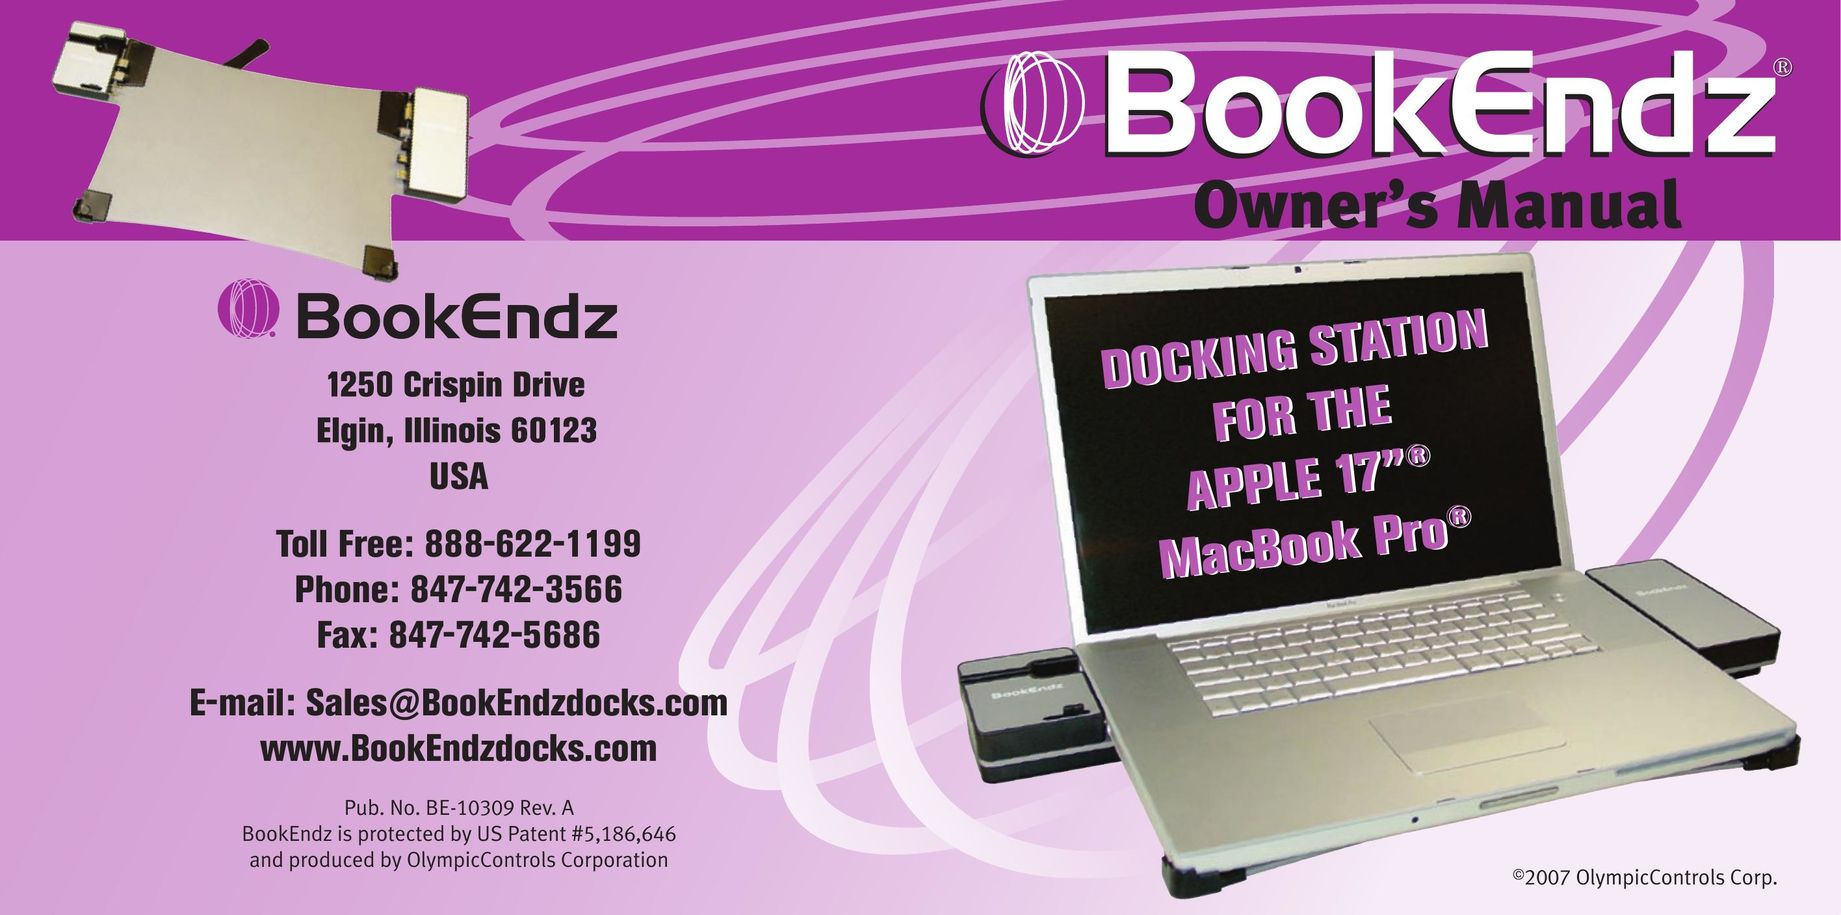 Bookendz BE-MBP17 Computer Accessories User Manual